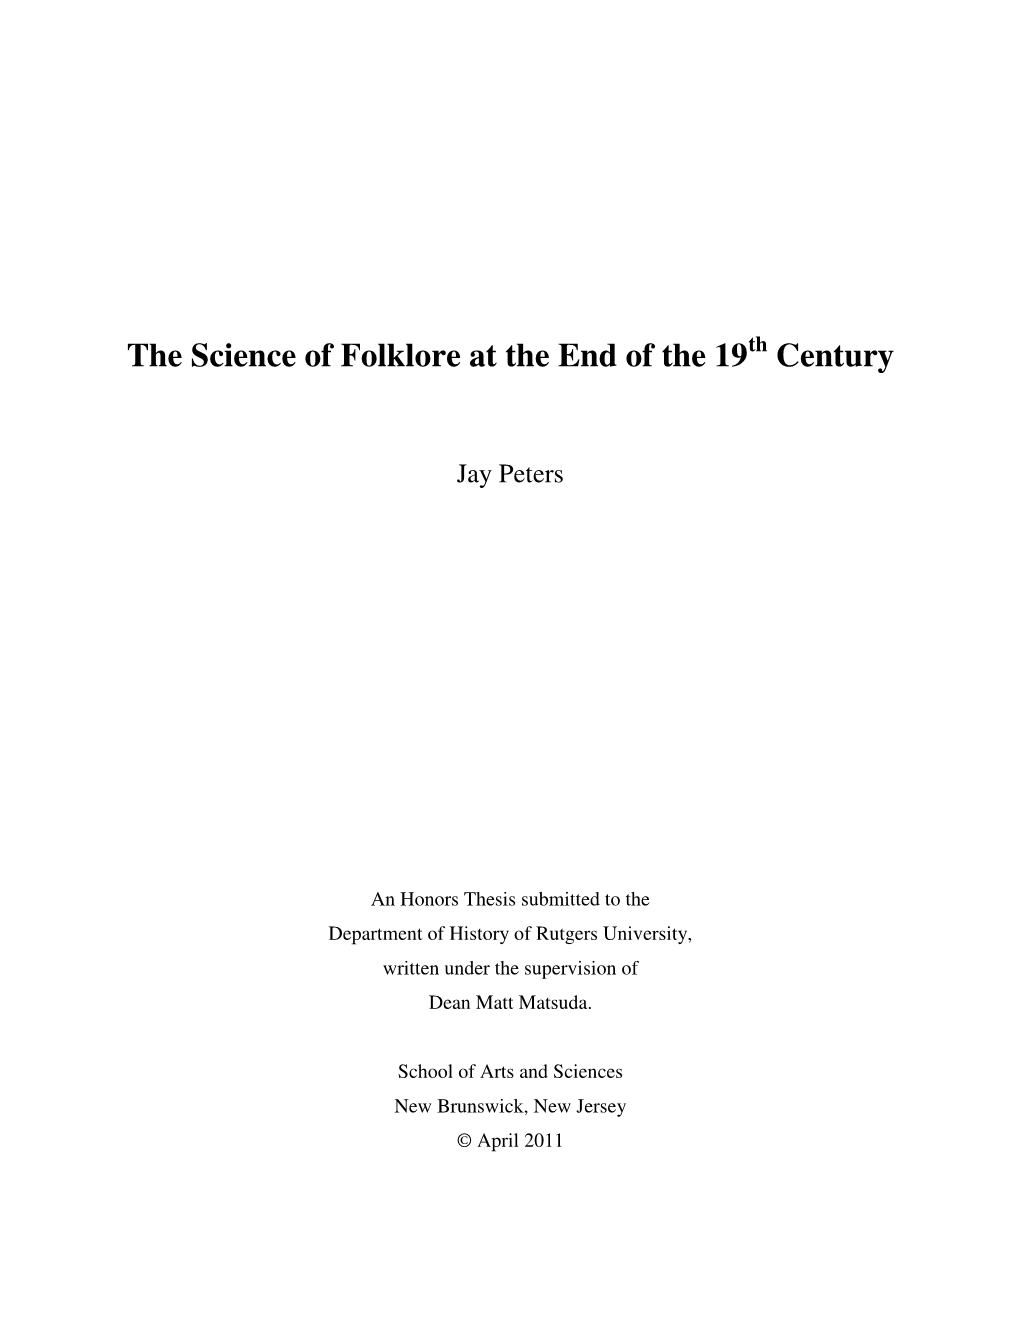 The Science of Folklore at the End of the 19 Century